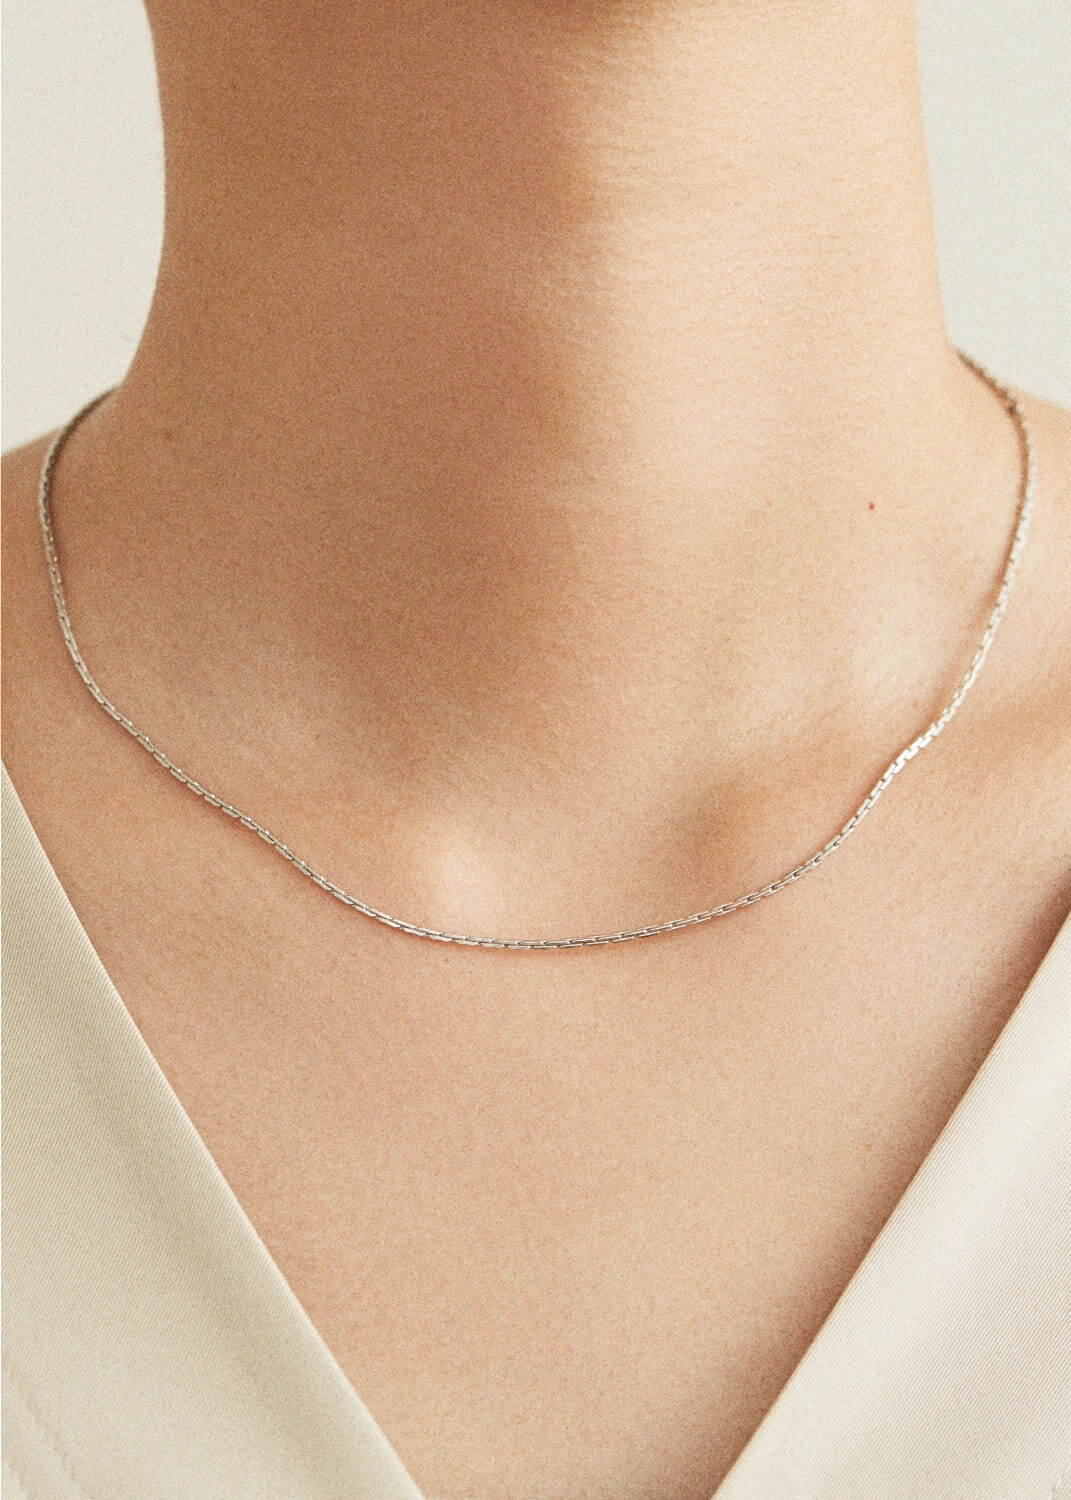 HAIRLINE NECKLACE 7,800円